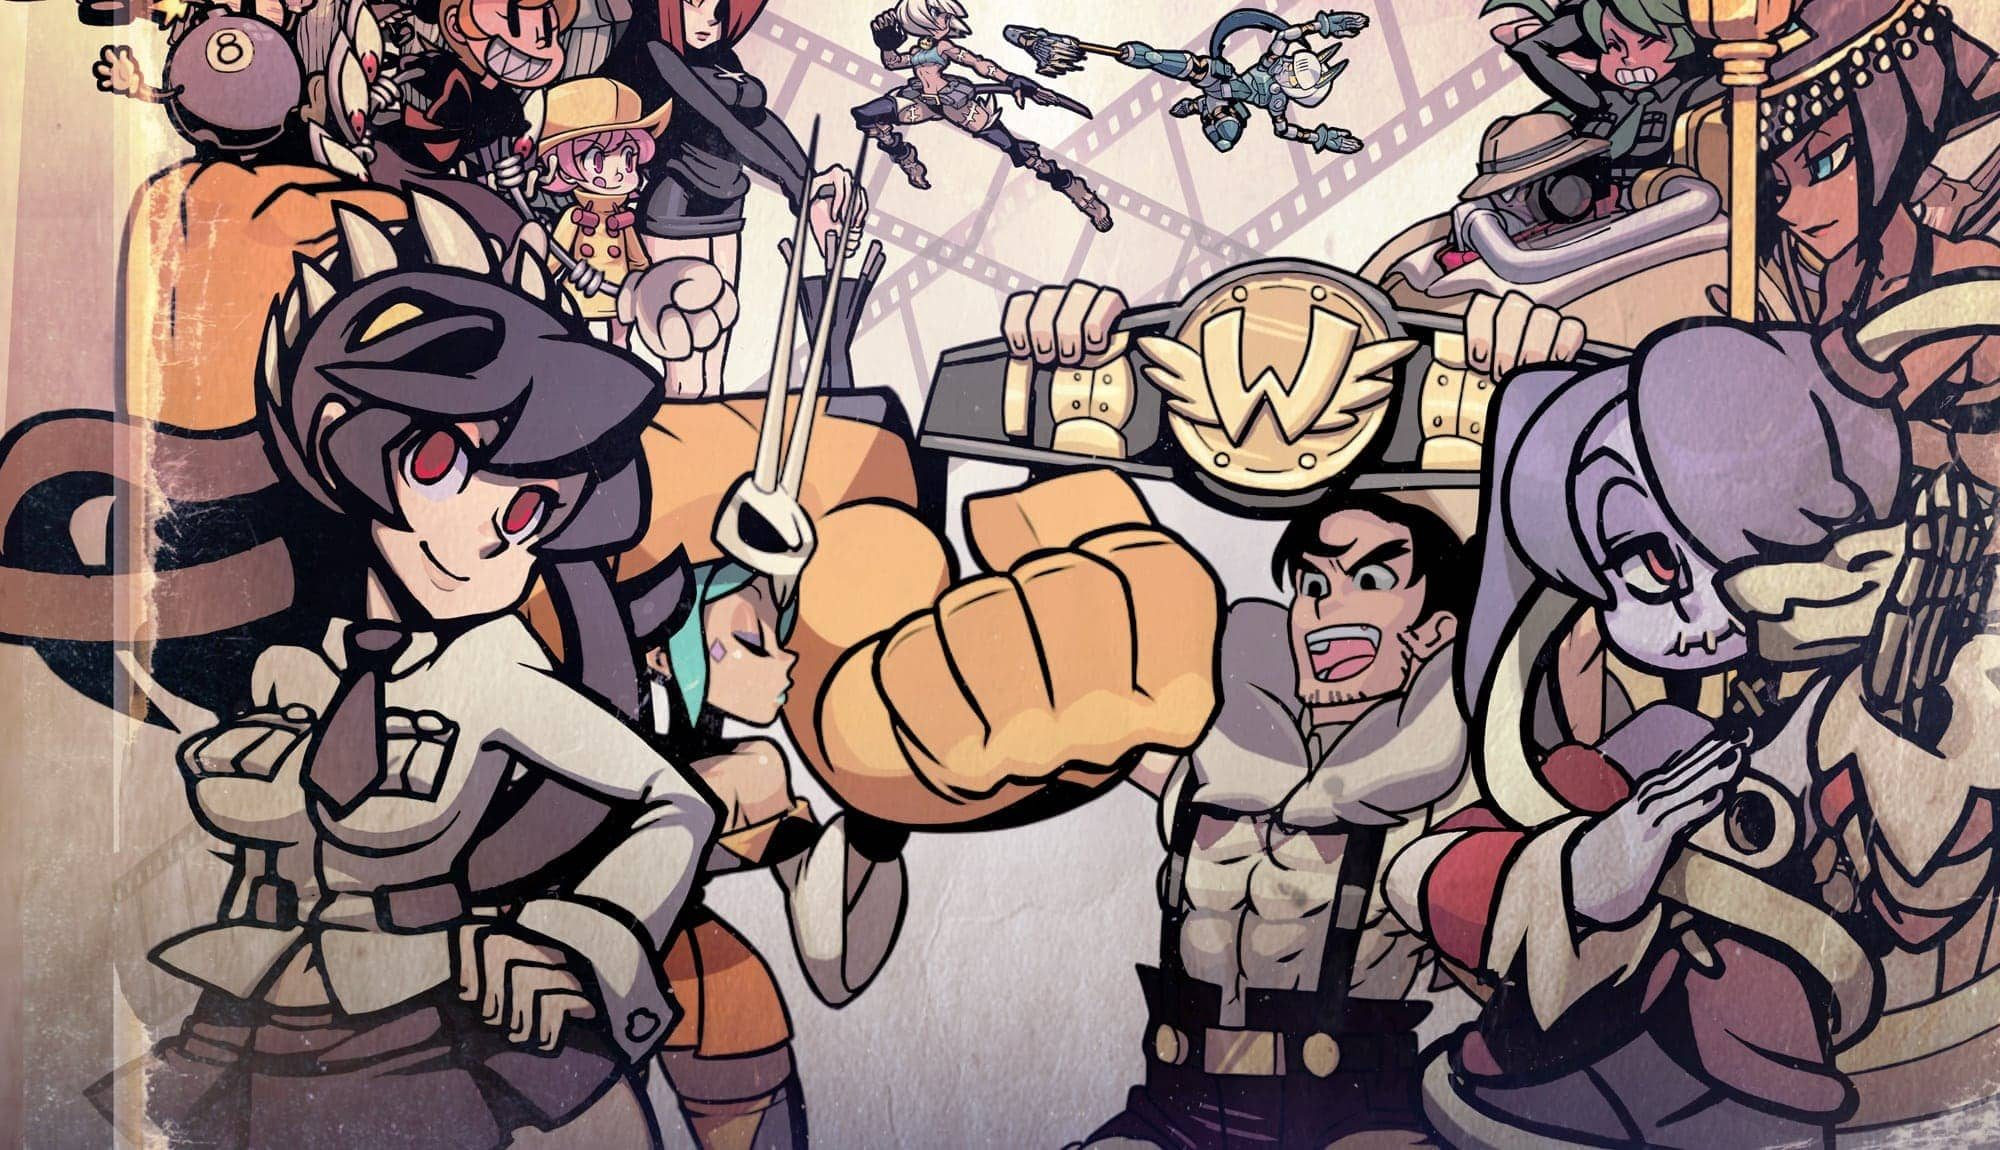 I also would like Bombs over Skullgirls too. 